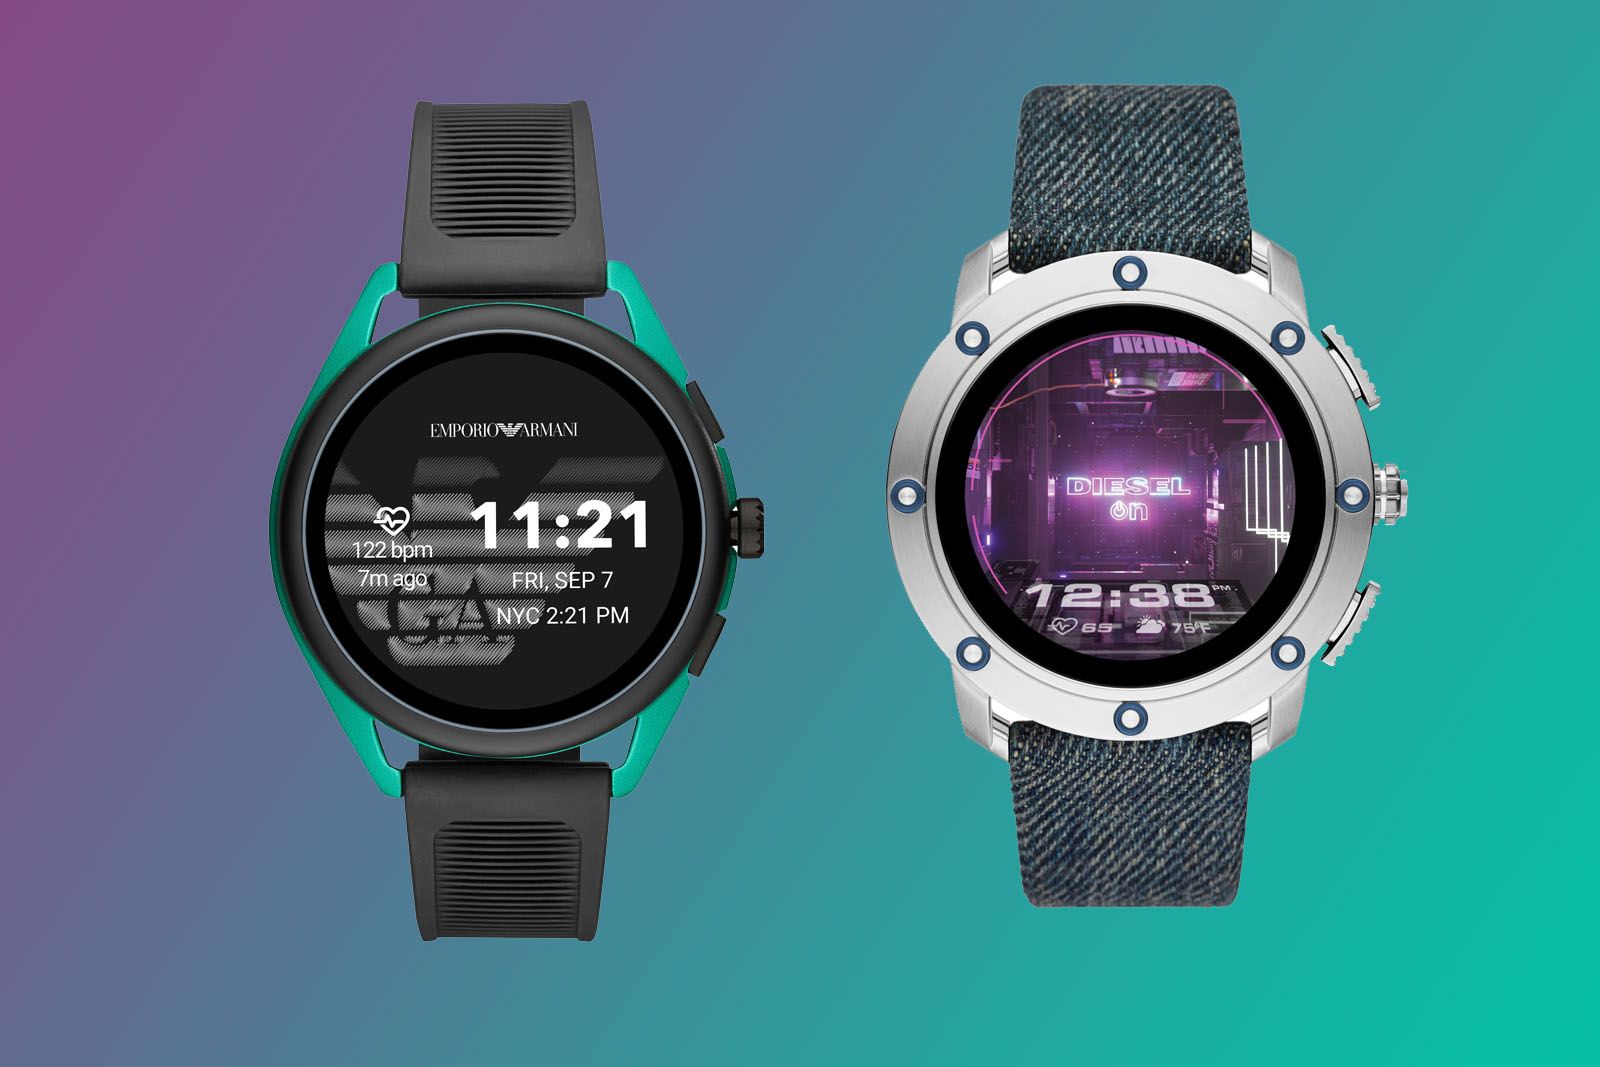 Fossil expands smartwatch line-up with Diesel and Emporio Armani models